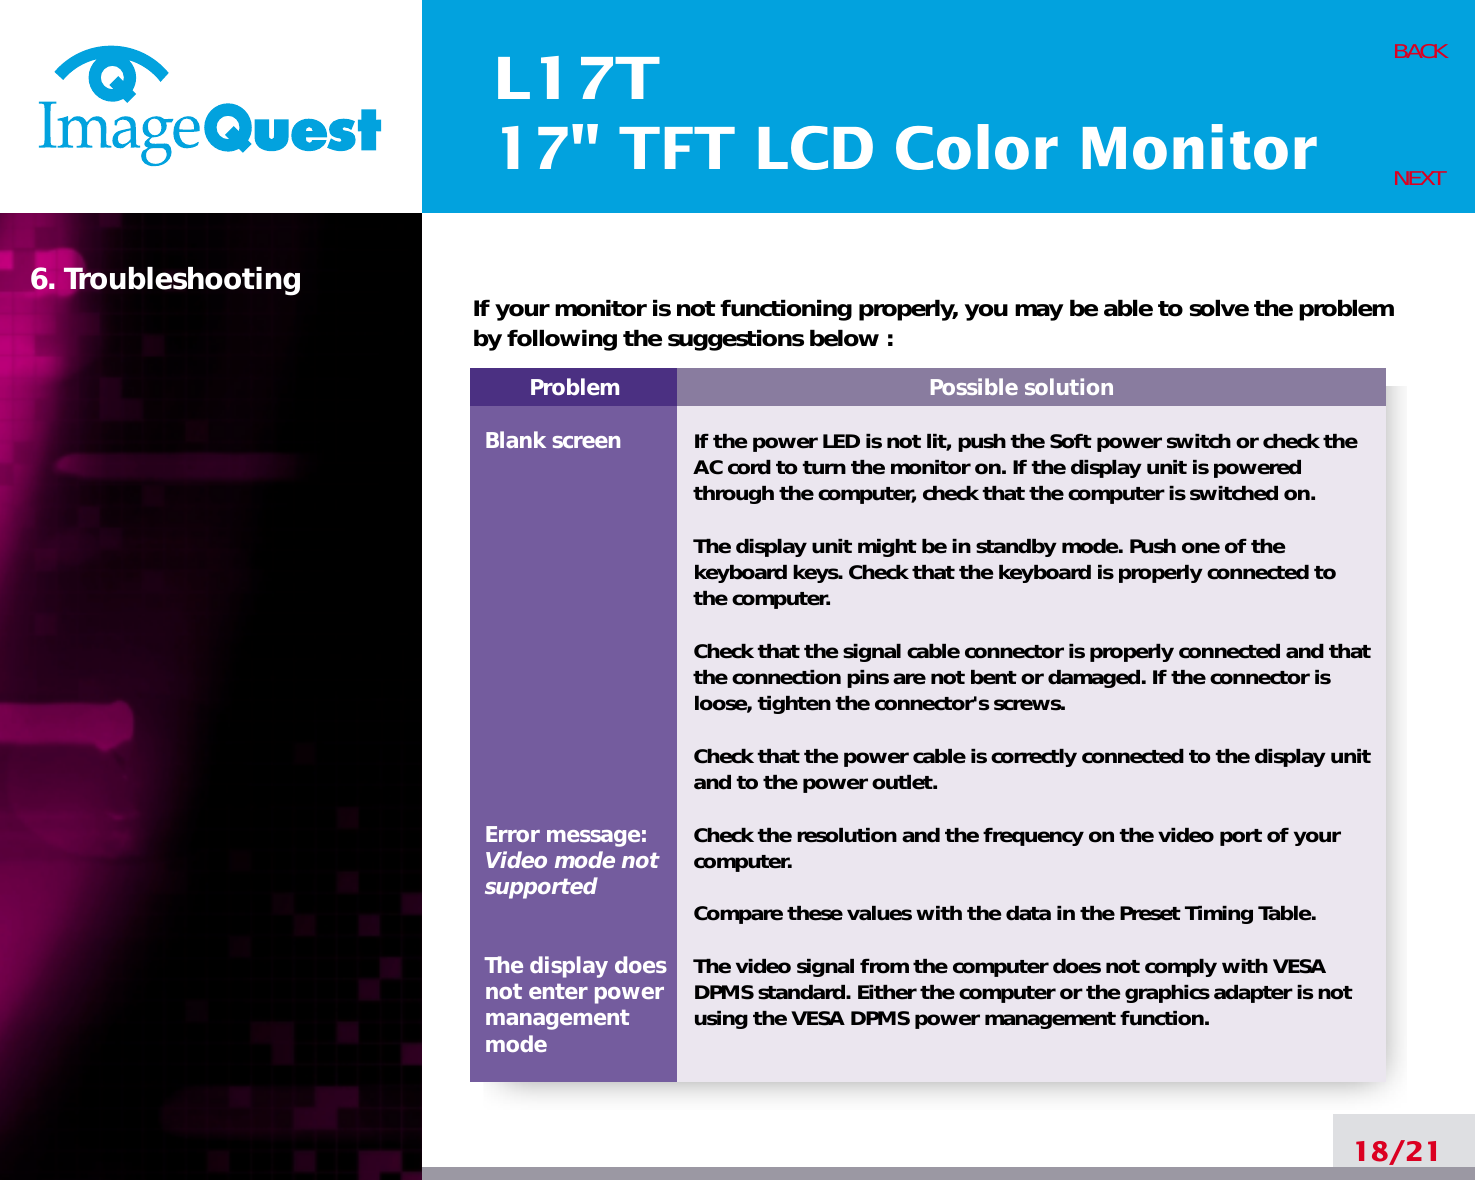 L17T17&quot; TFT LCD Color Monitor6. Troubleshooting18/21BACKNEXTProblemBlank screenError message:Video mode notsupportedThe display does not enter power managementmodePossible solutionIf the power LED is not lit, push the Soft power switch or check theAC cord to turn the monitor on. If the display unit is poweredthrough the computer, check that the computer is switched on.The display unit might be in standby mode. Push one of thekeyboard keys. Check that the keyboard is properly connected tothe computer.Check that the signal cable connector is properly connected and thatthe connection pins are not bent or damaged. If the connector isloose, tighten the connector&apos;s screws.Check that the power cable is correctly connected to the display unitand to the power outlet. Check the resolution and the frequency on the video port of yourcomputer.Compare these values with the data in the Preset Timing Table.The video signal from the computer does not comply with VESADPMS standard. Either the computer or the graphics adapter is notusing the VESA DPMS power management function.If your monitor is not functioning properly, you may be able to solve the problemby following the suggestions below :